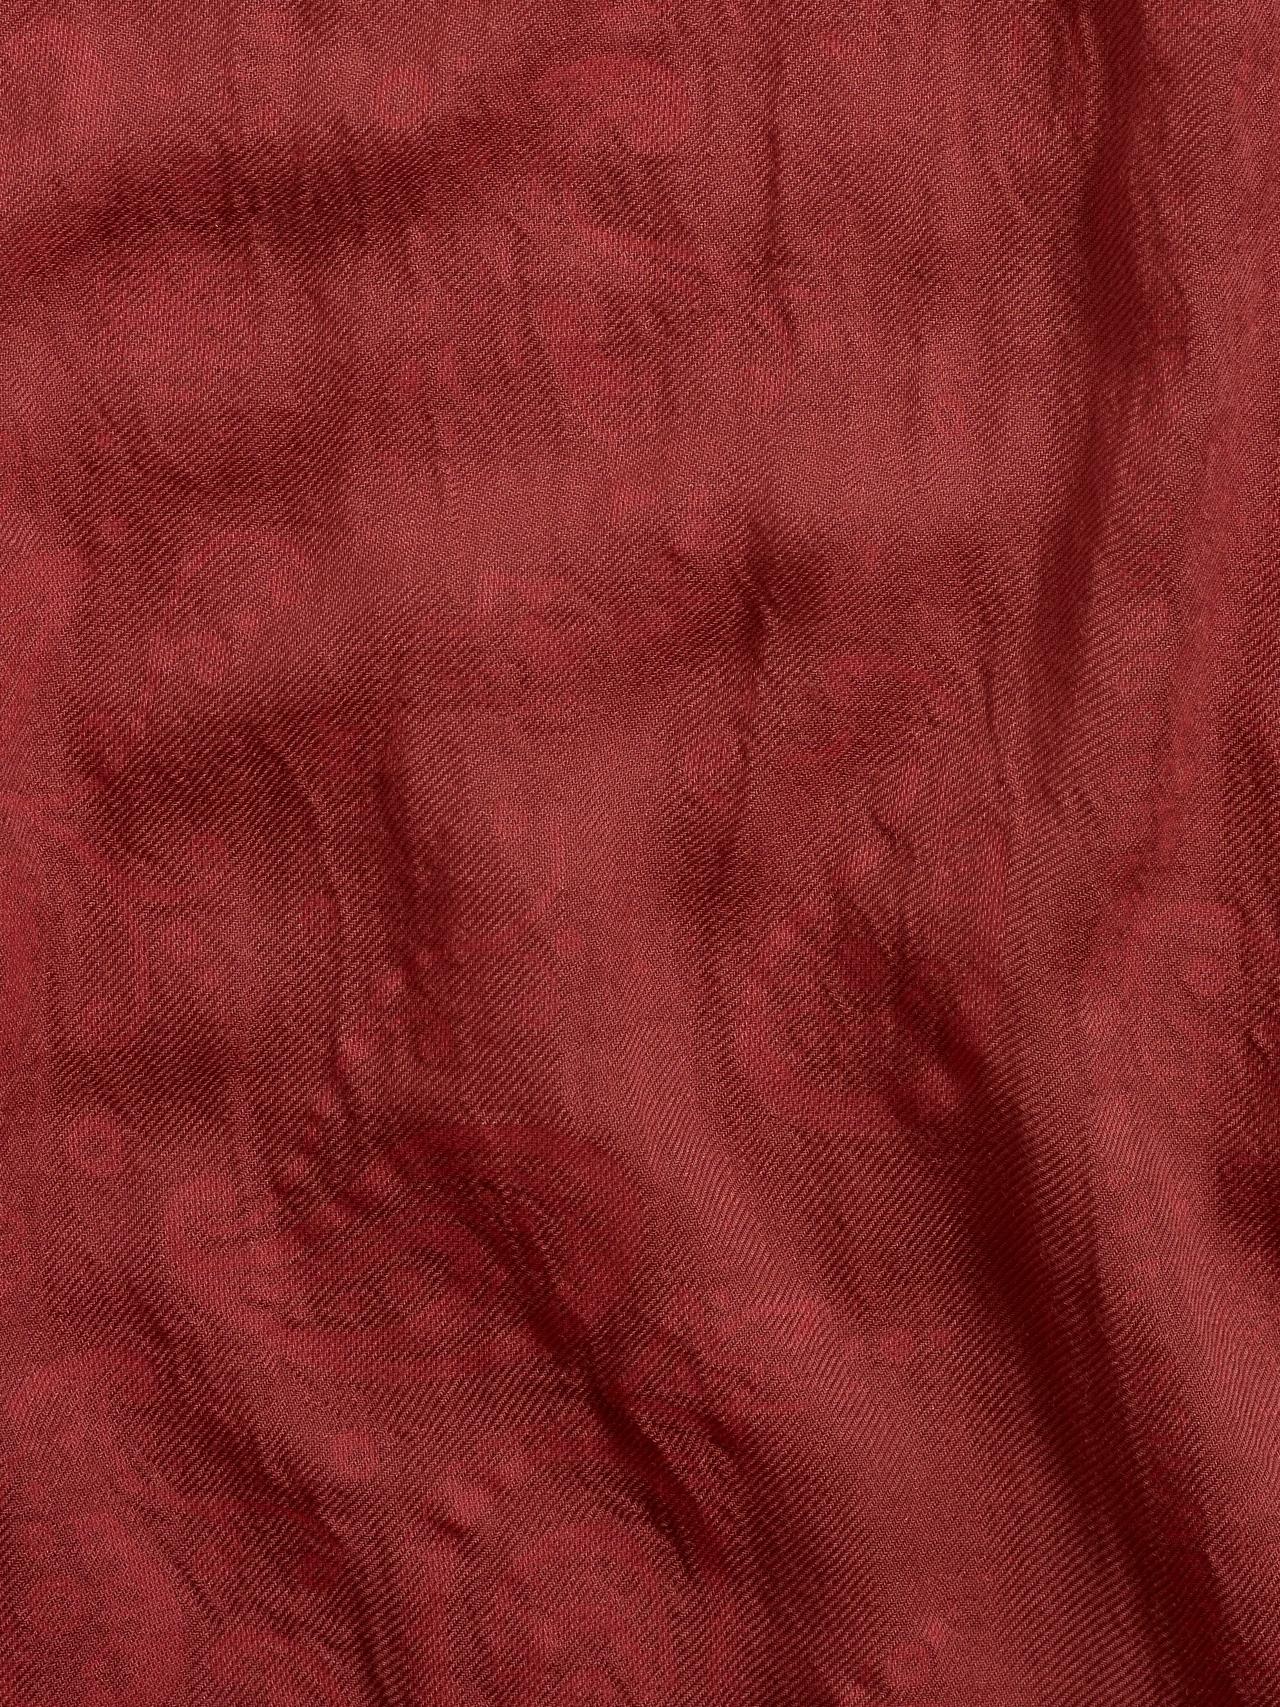 Fade Paisley Scarf image number 2